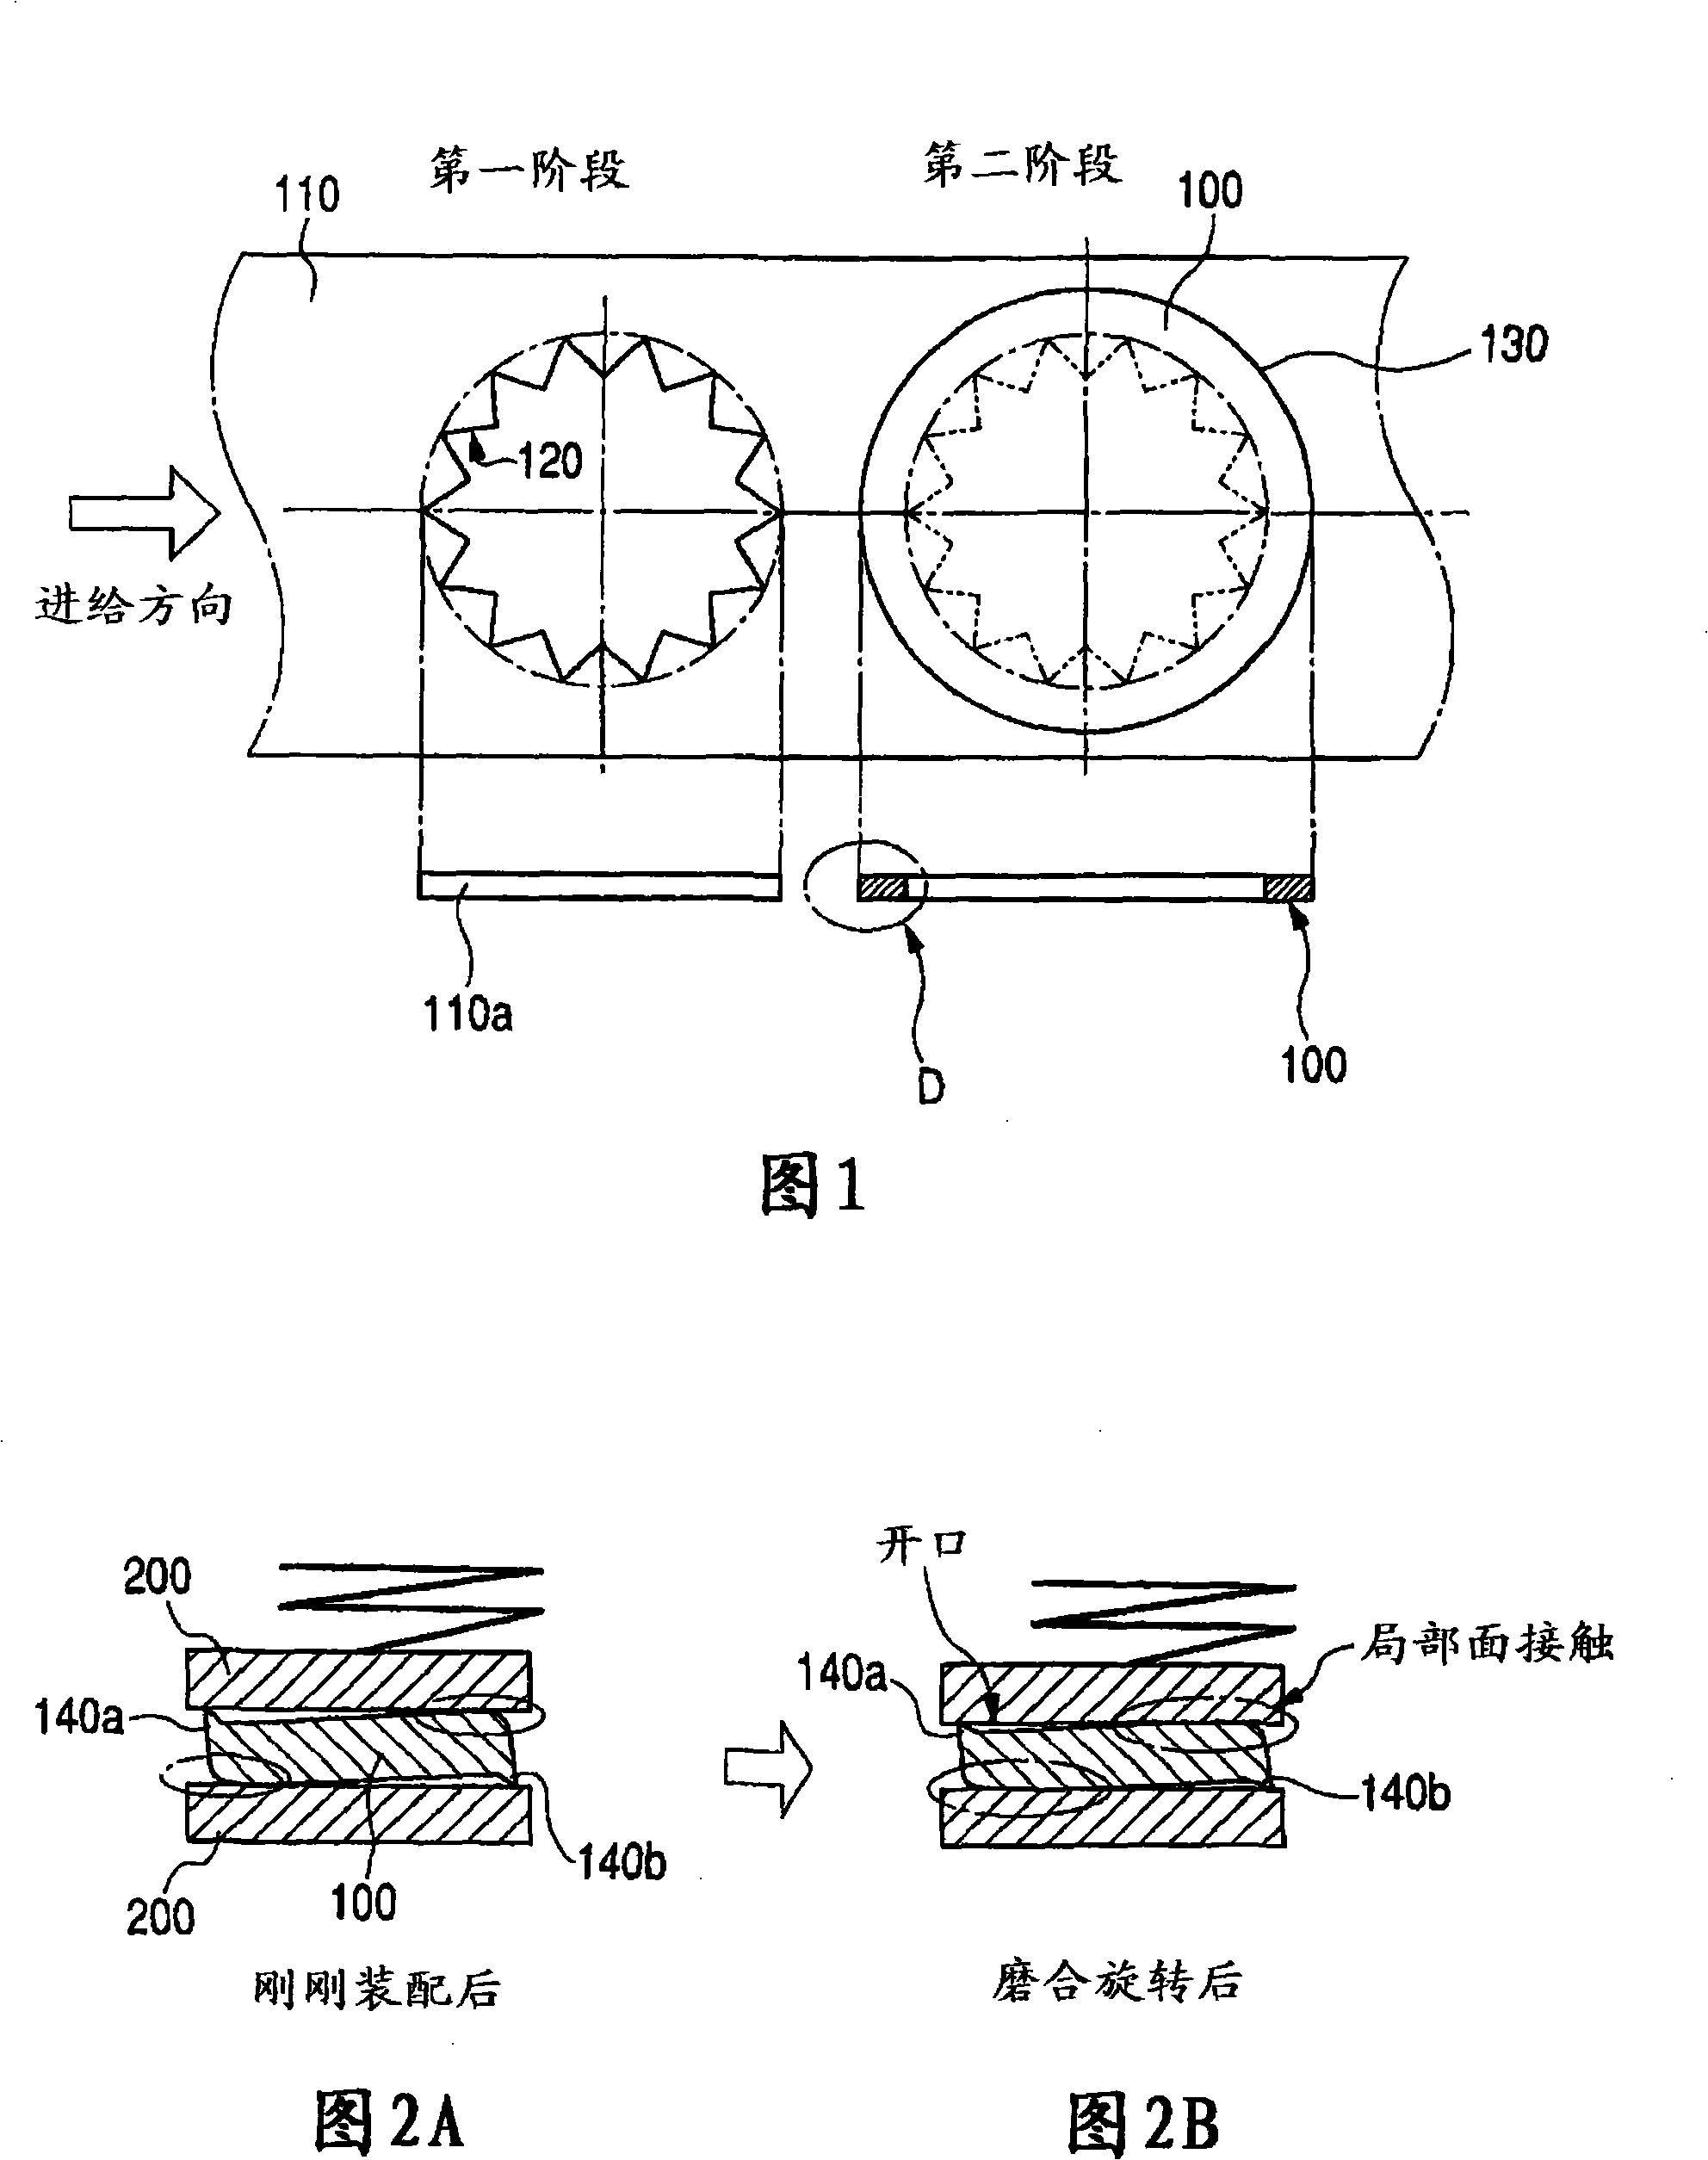 Method of manufacturing gear from metal sheet and the gear manufactured by the method